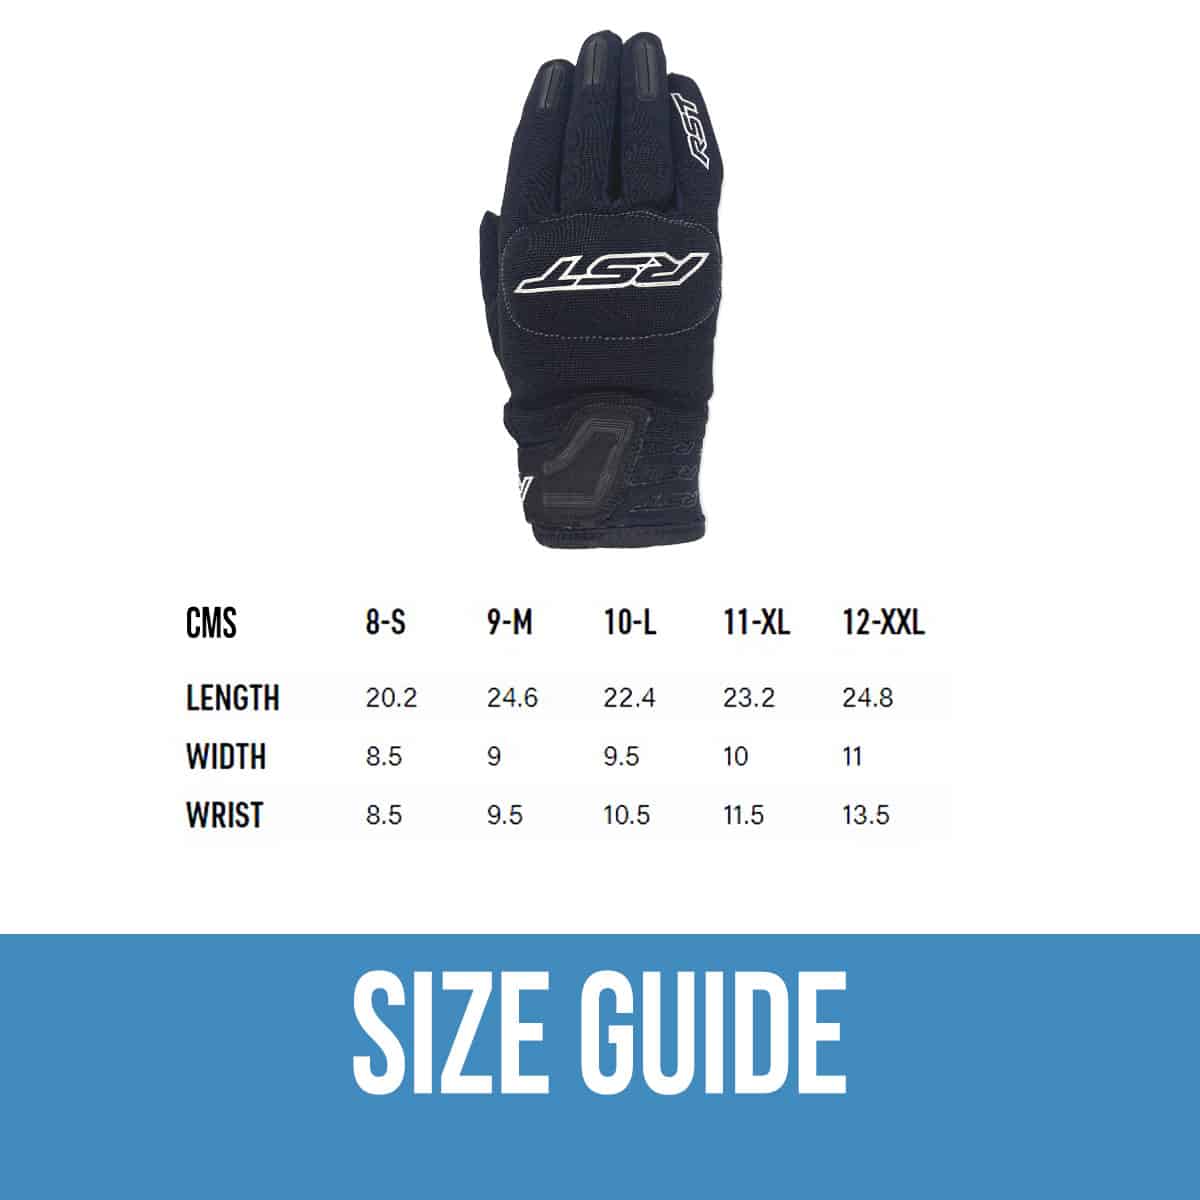 RST Rider 2100 CE-certified Gloves: Light-weight summer gloves for urban rides & touring - size guide